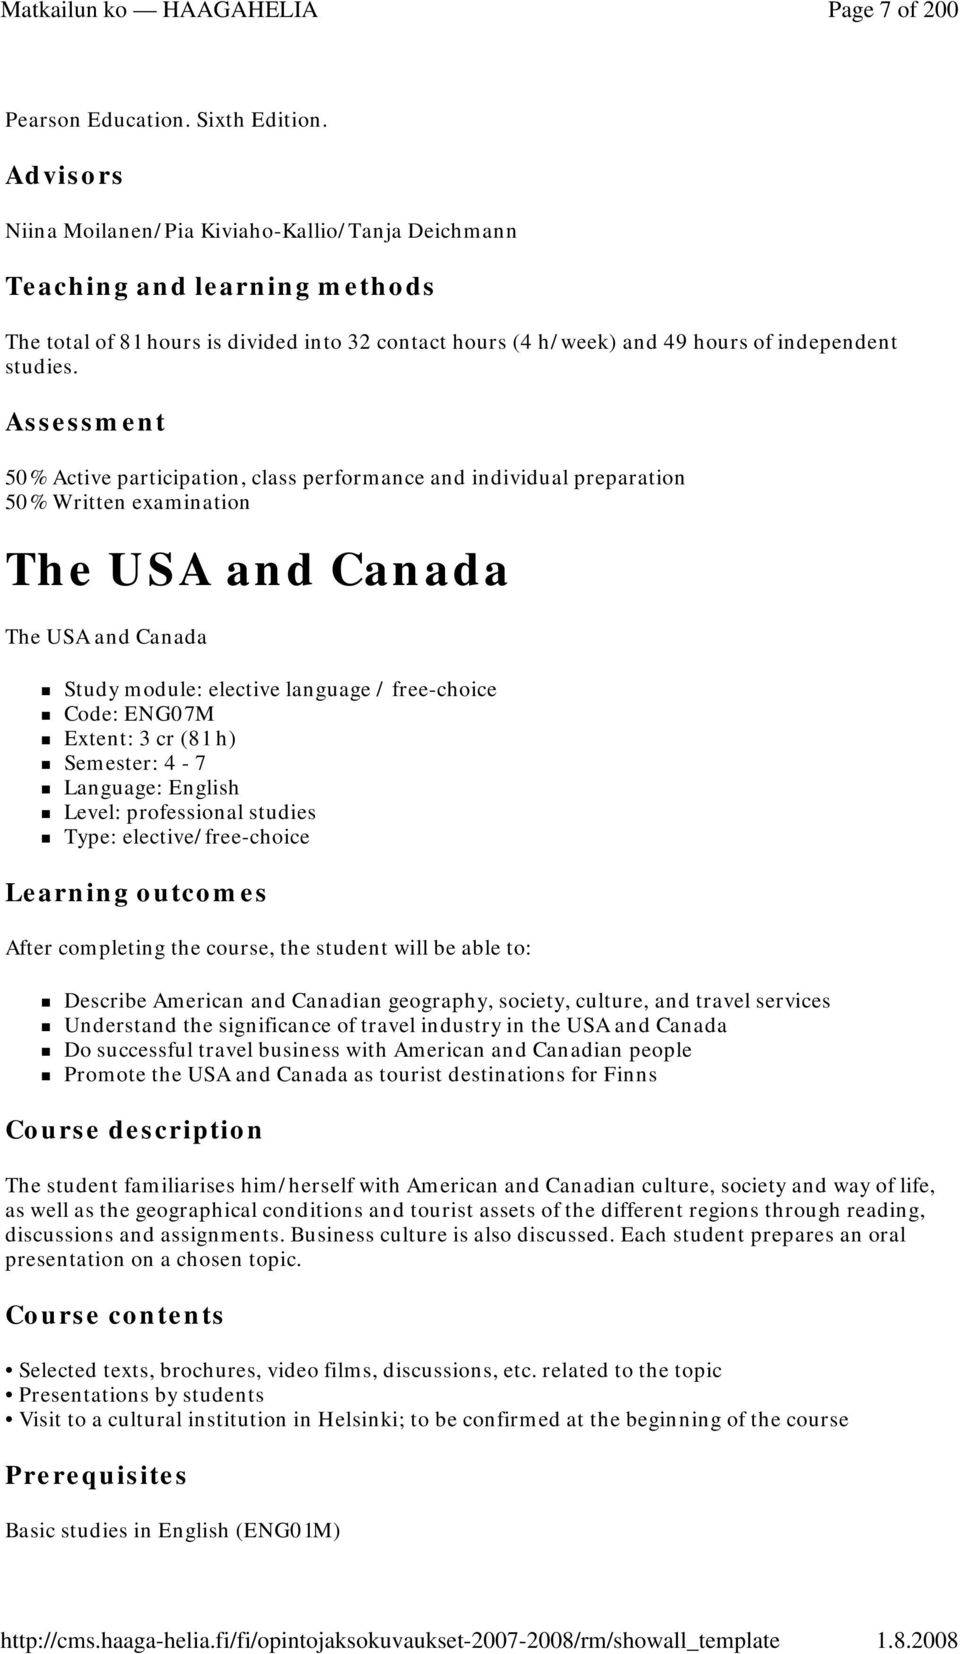 Assessment 50% Active participation, class performance and individual preparation 50% Written examination The USA and Canada The USA and Canada Study module: elective language / free-choice Code: